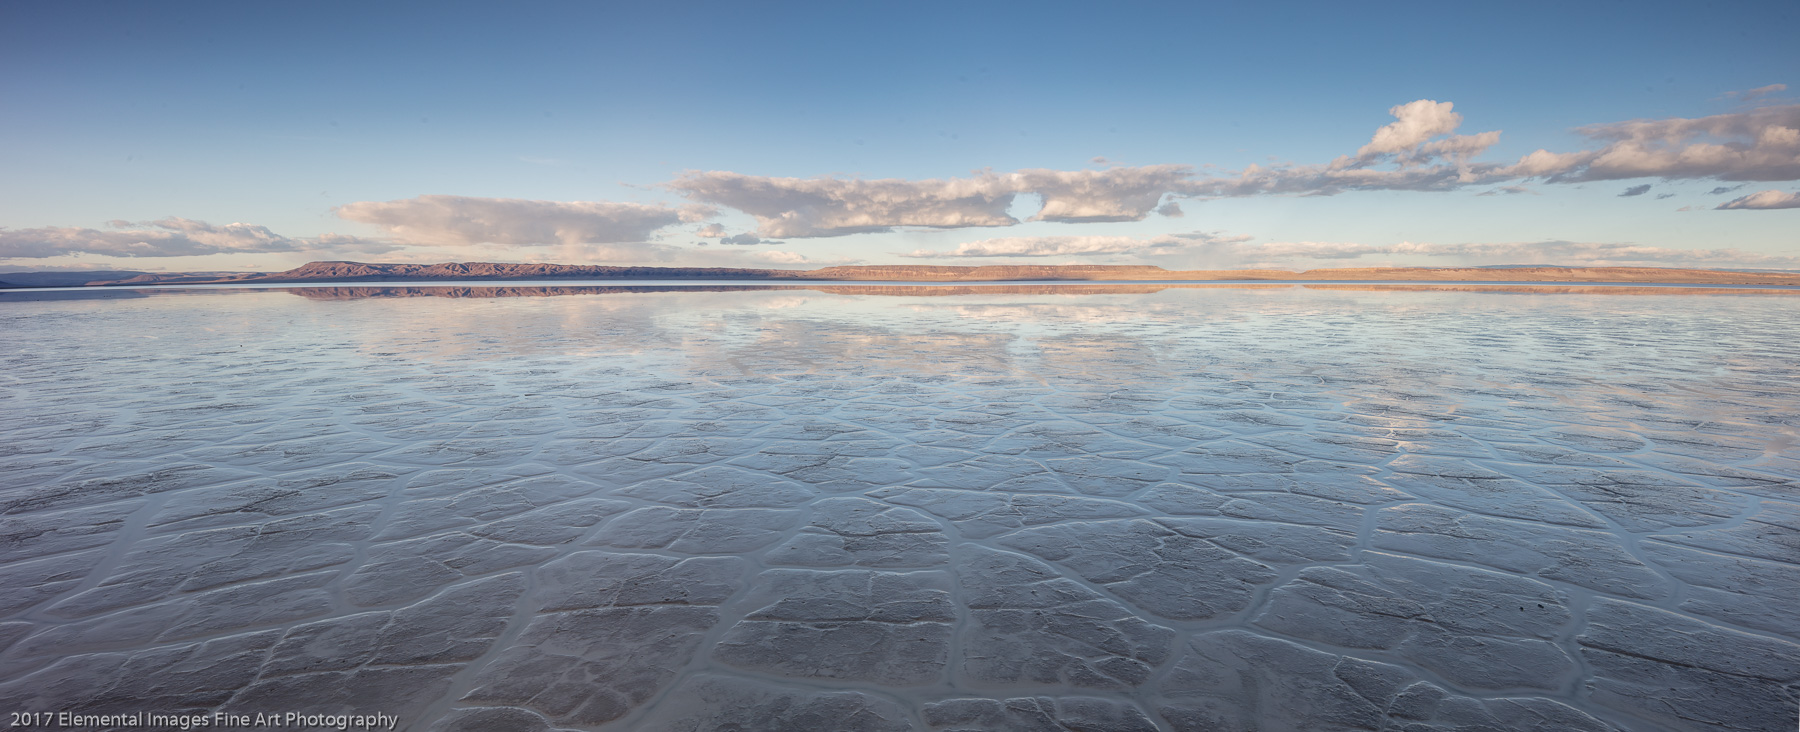 Desert Playa with Evening Light | Alvord Desert | OR | USA - © 2017 Elemental Images Fine Art Photography - All Rights Reserved Worldwide